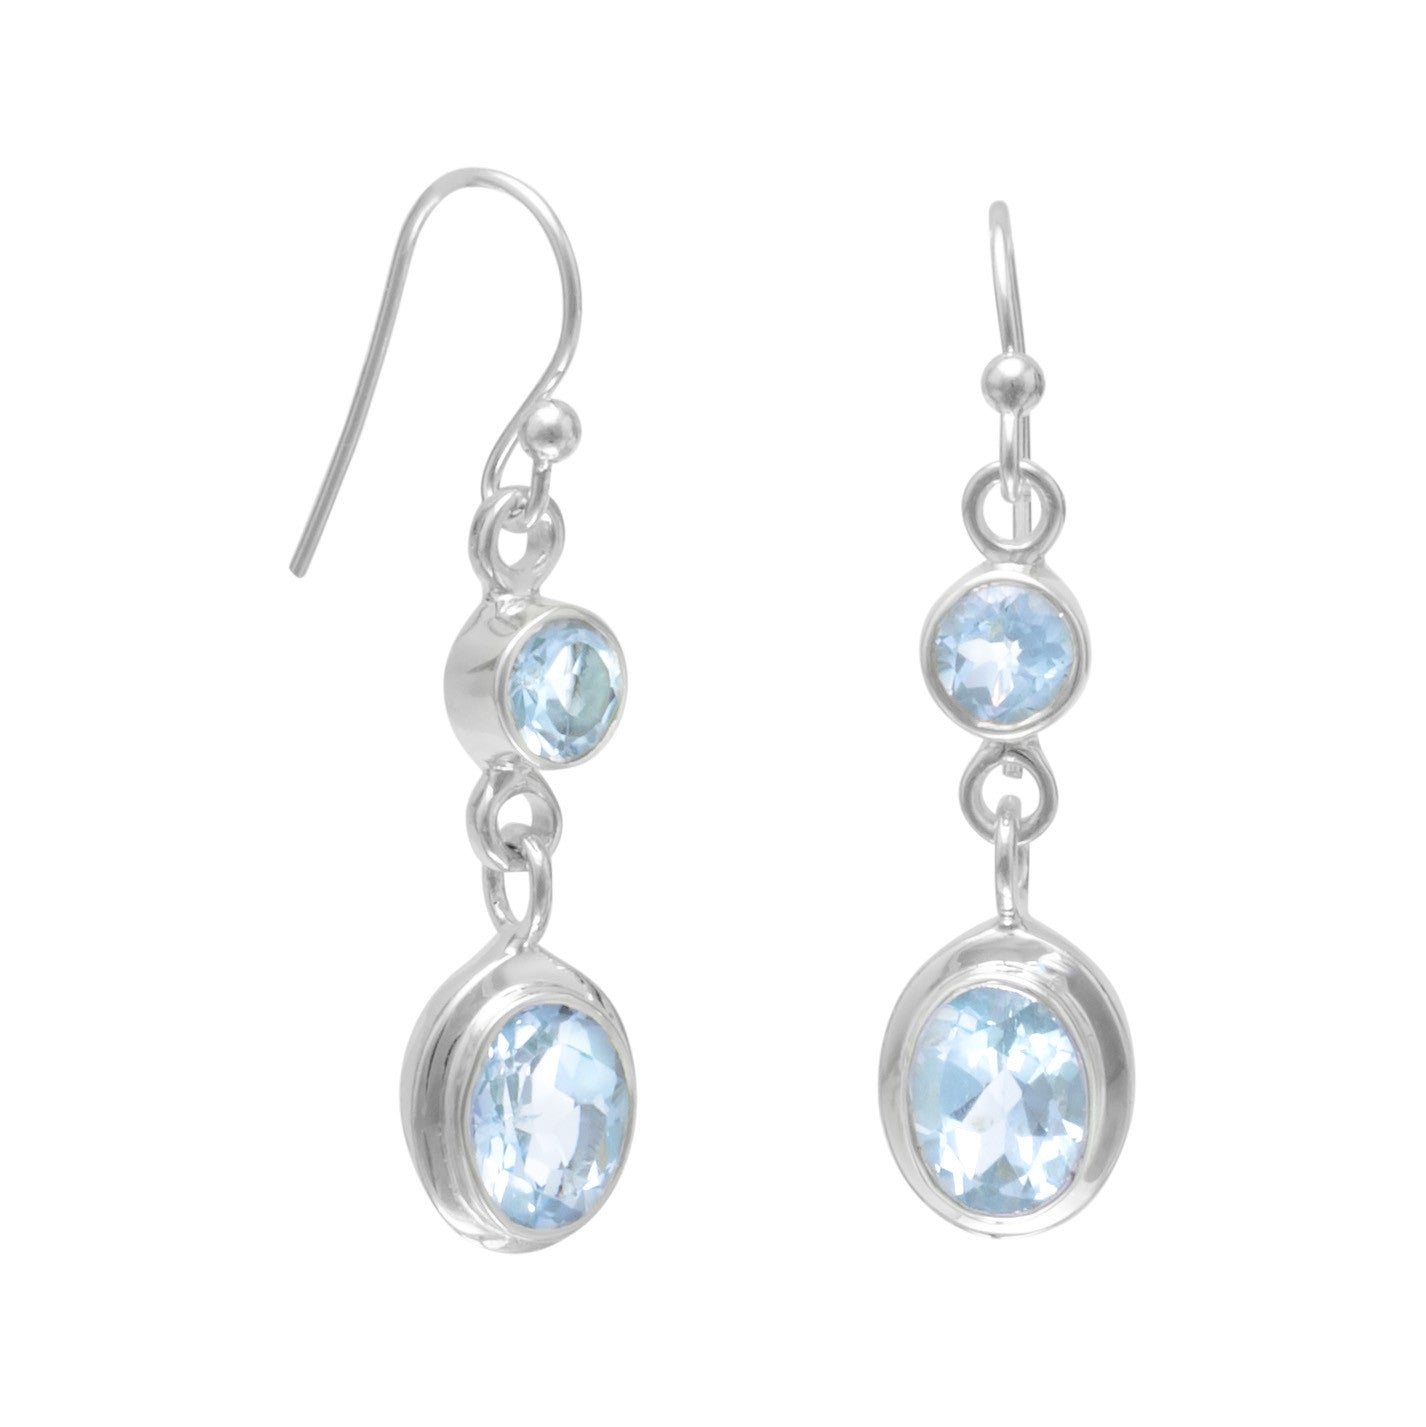 Round and Oval Blue Topaz Earrings on French Wire - Scarvesnthangs